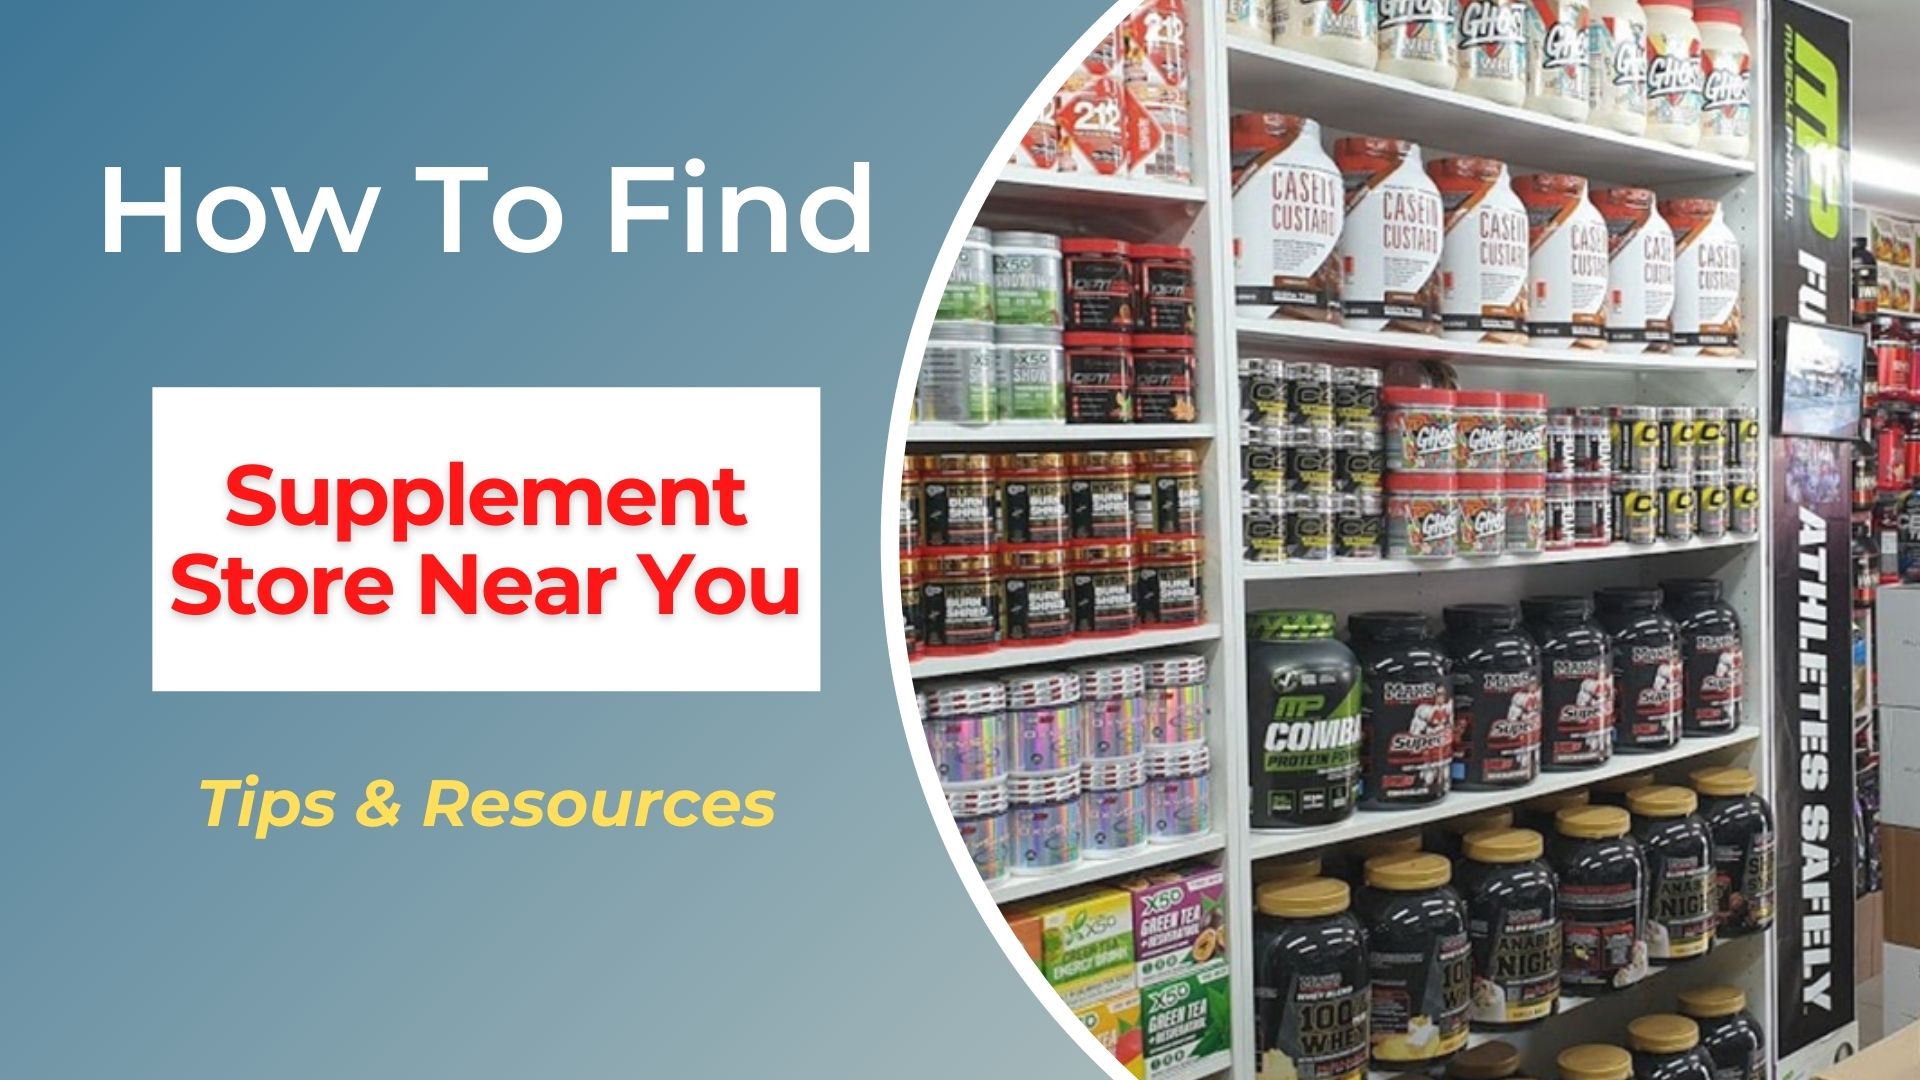 How to Find a Supplement Store Near Me Tips and Resources